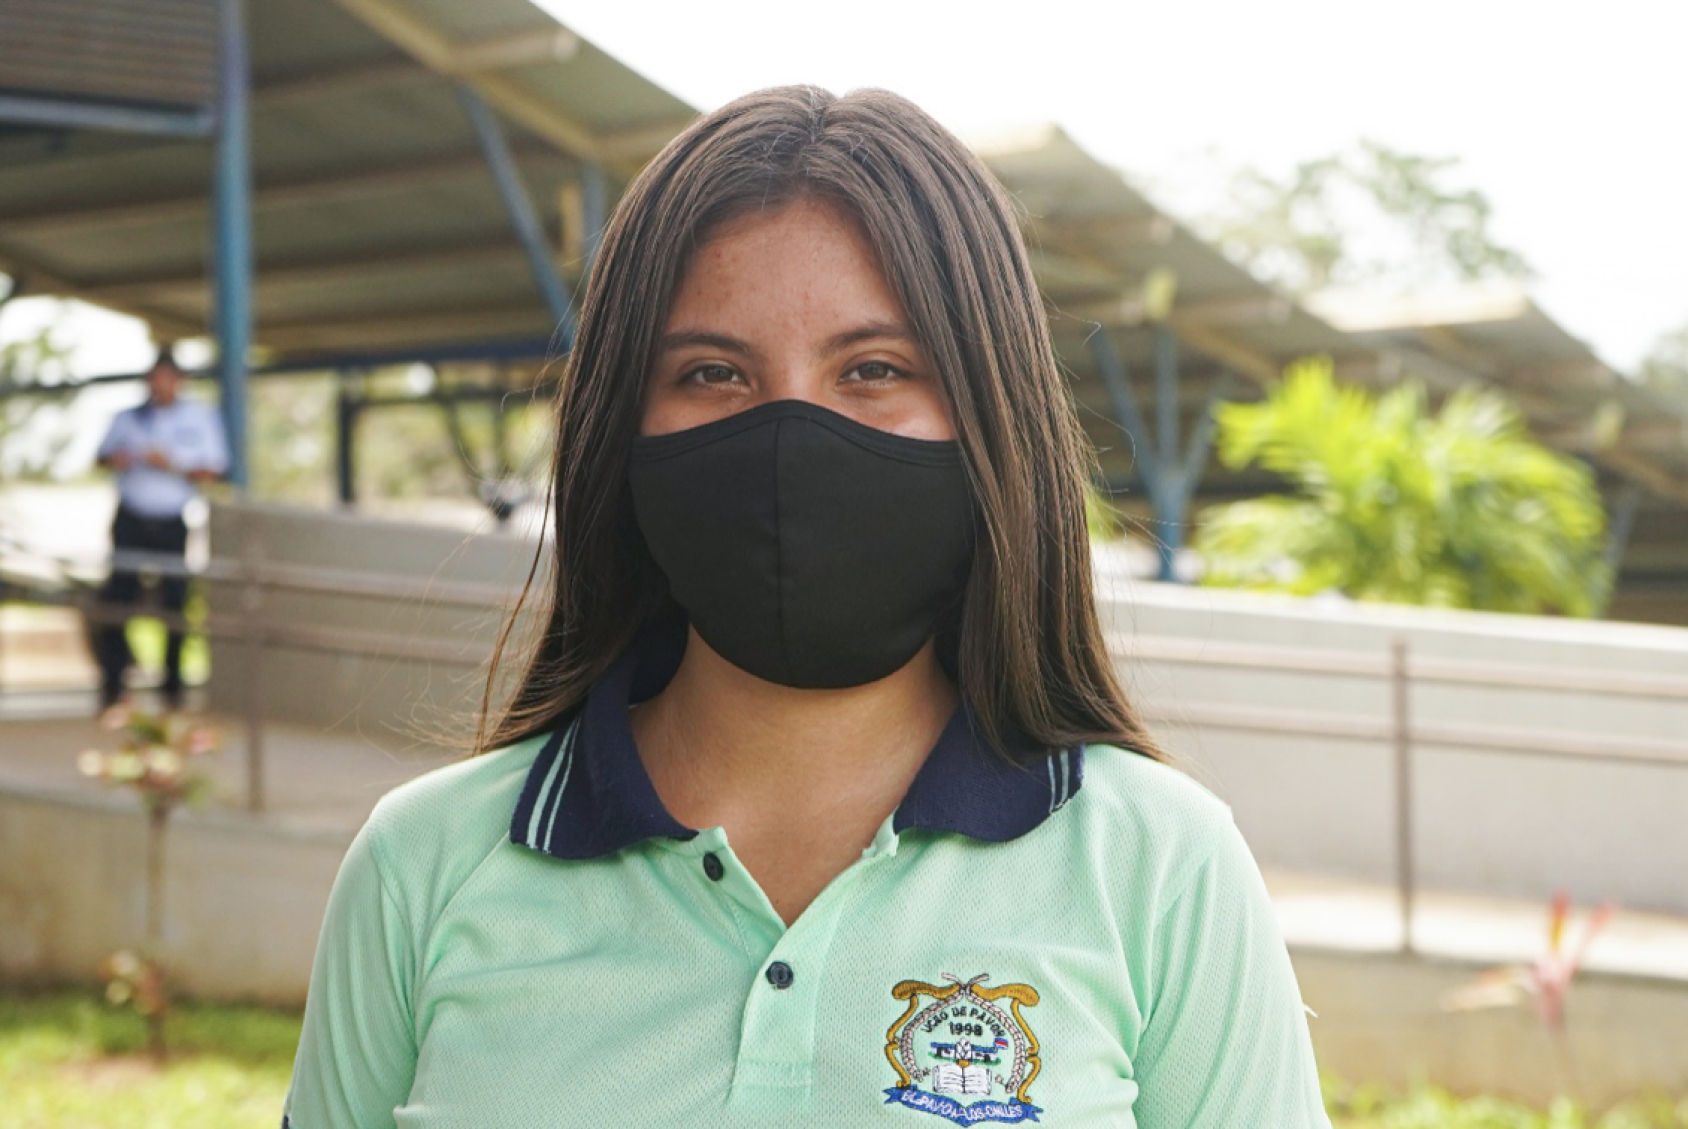 A girl in a school uniform and black face mask looks directly at the camera at her school. 